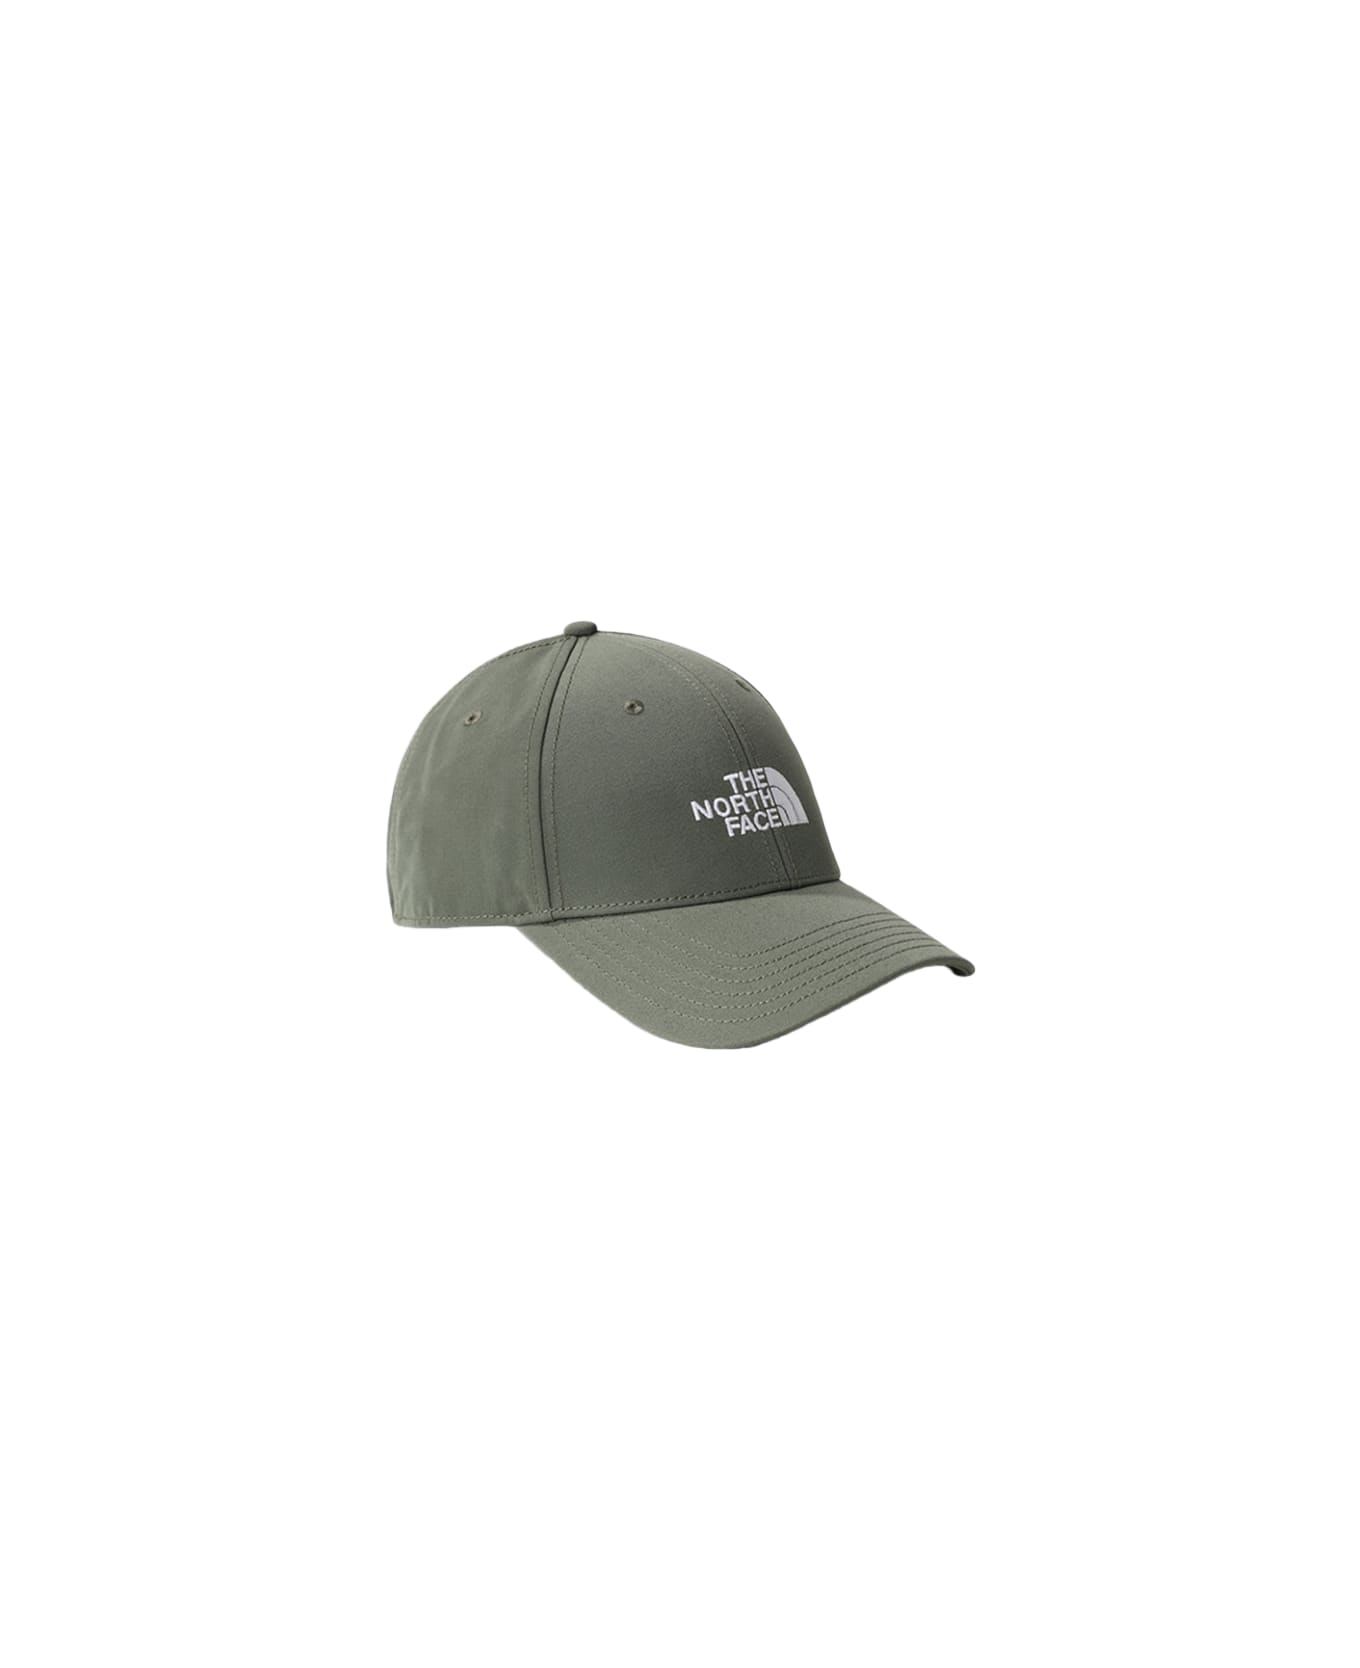 The North Face Recycled 66 Classic Hat Green cap with logo embroidery - Recycled 66 classic hat - Verde